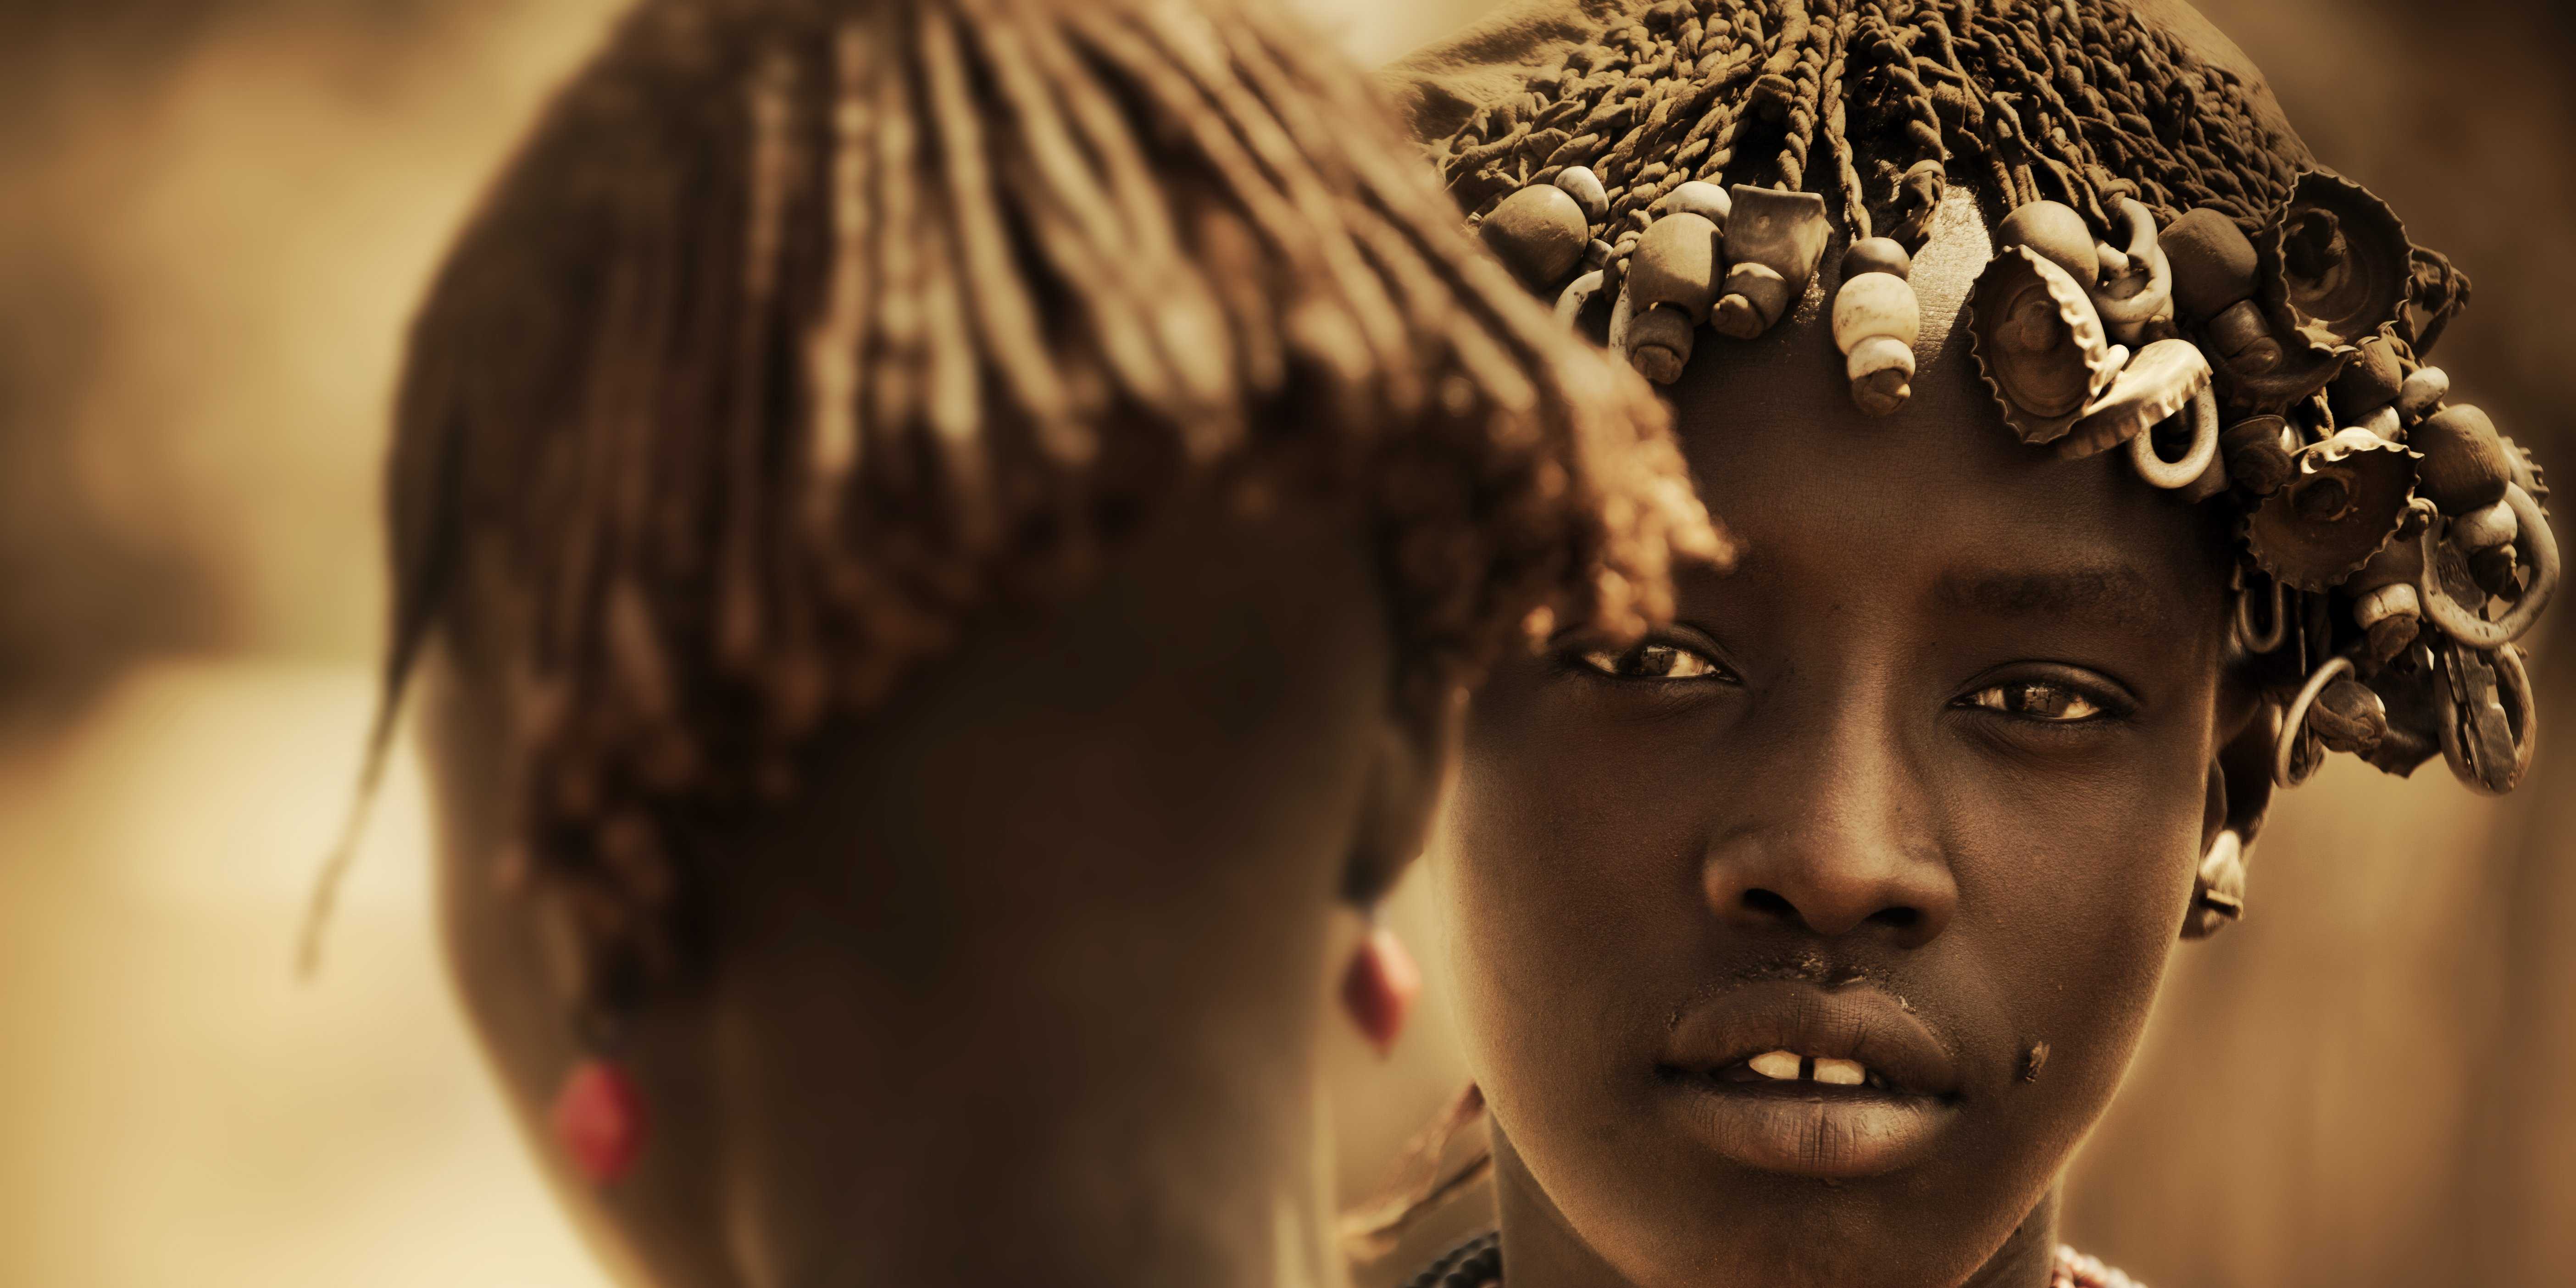 African Tribes Wallpaper High Quality